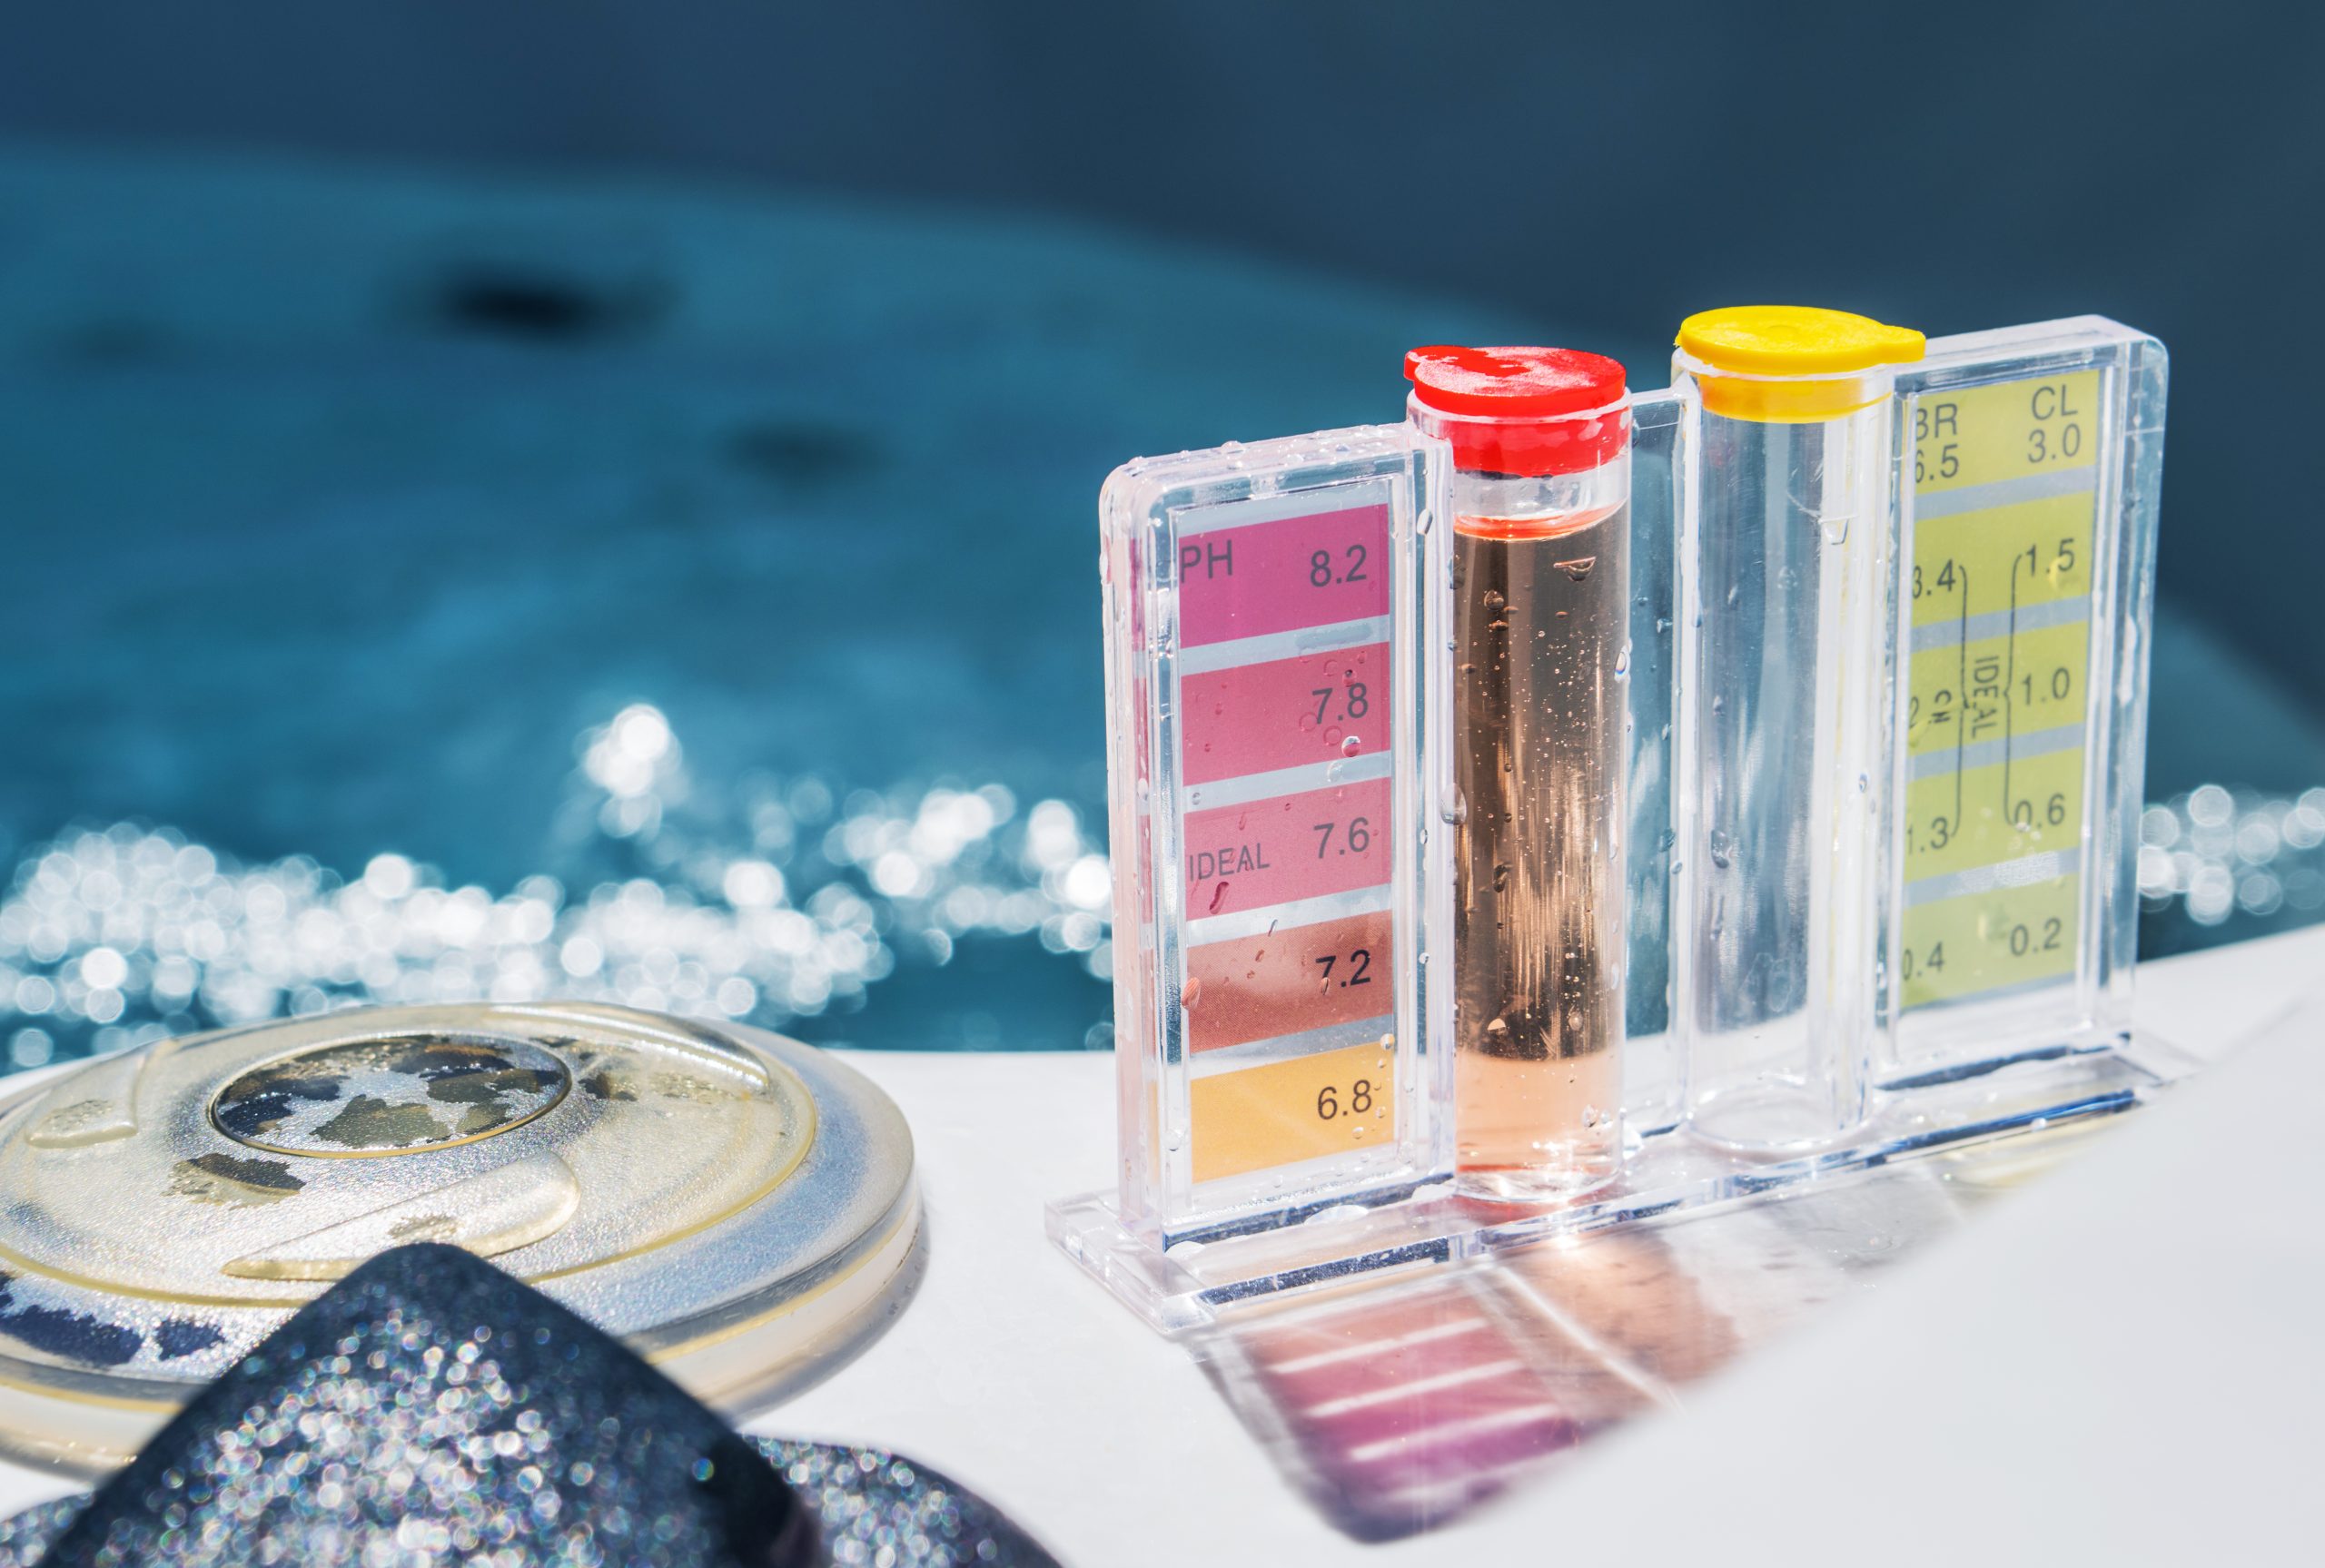 A Complete Guide to Testing, Raising, and Lowering Pool pH Levels